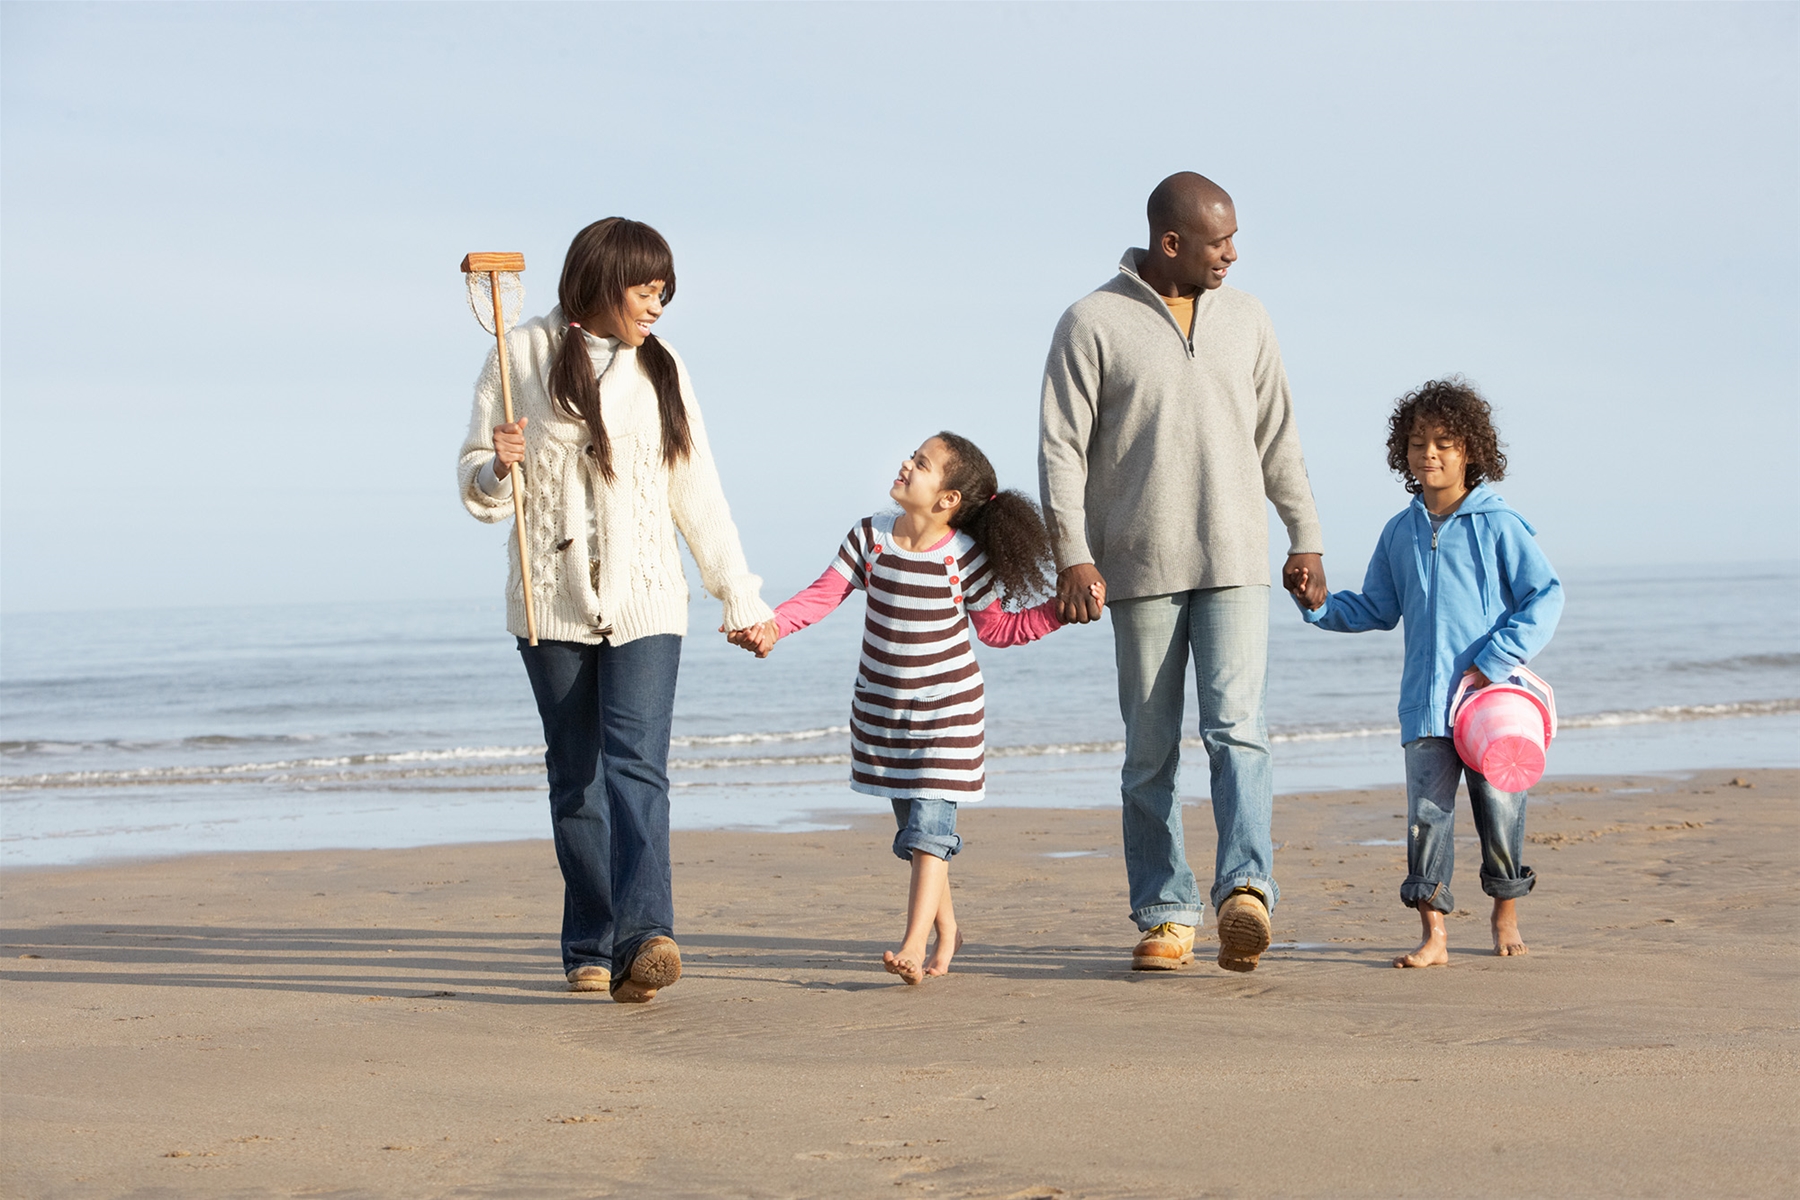 Discover Cape Cod's best family-friendly beaches for your summer vacation with Nauset Rental